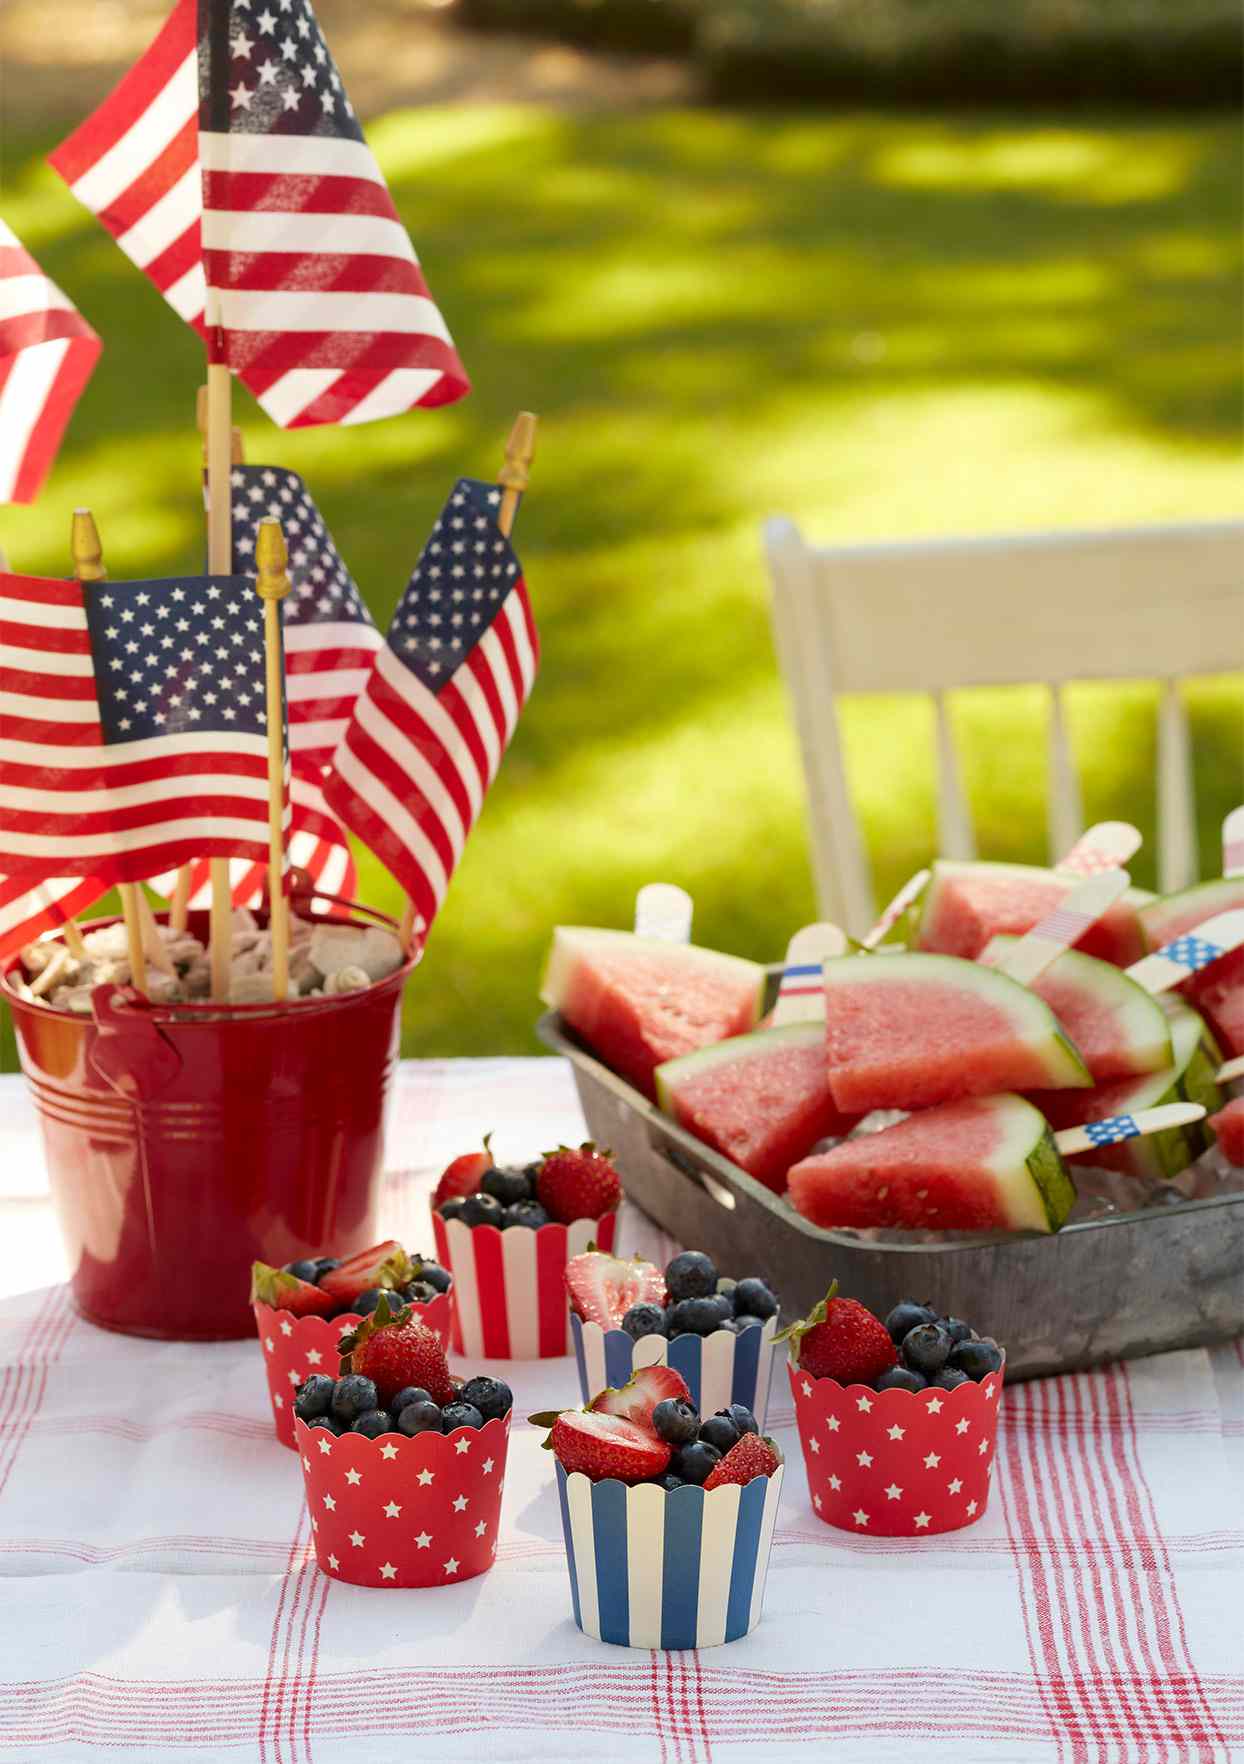 4th of July fruit holders